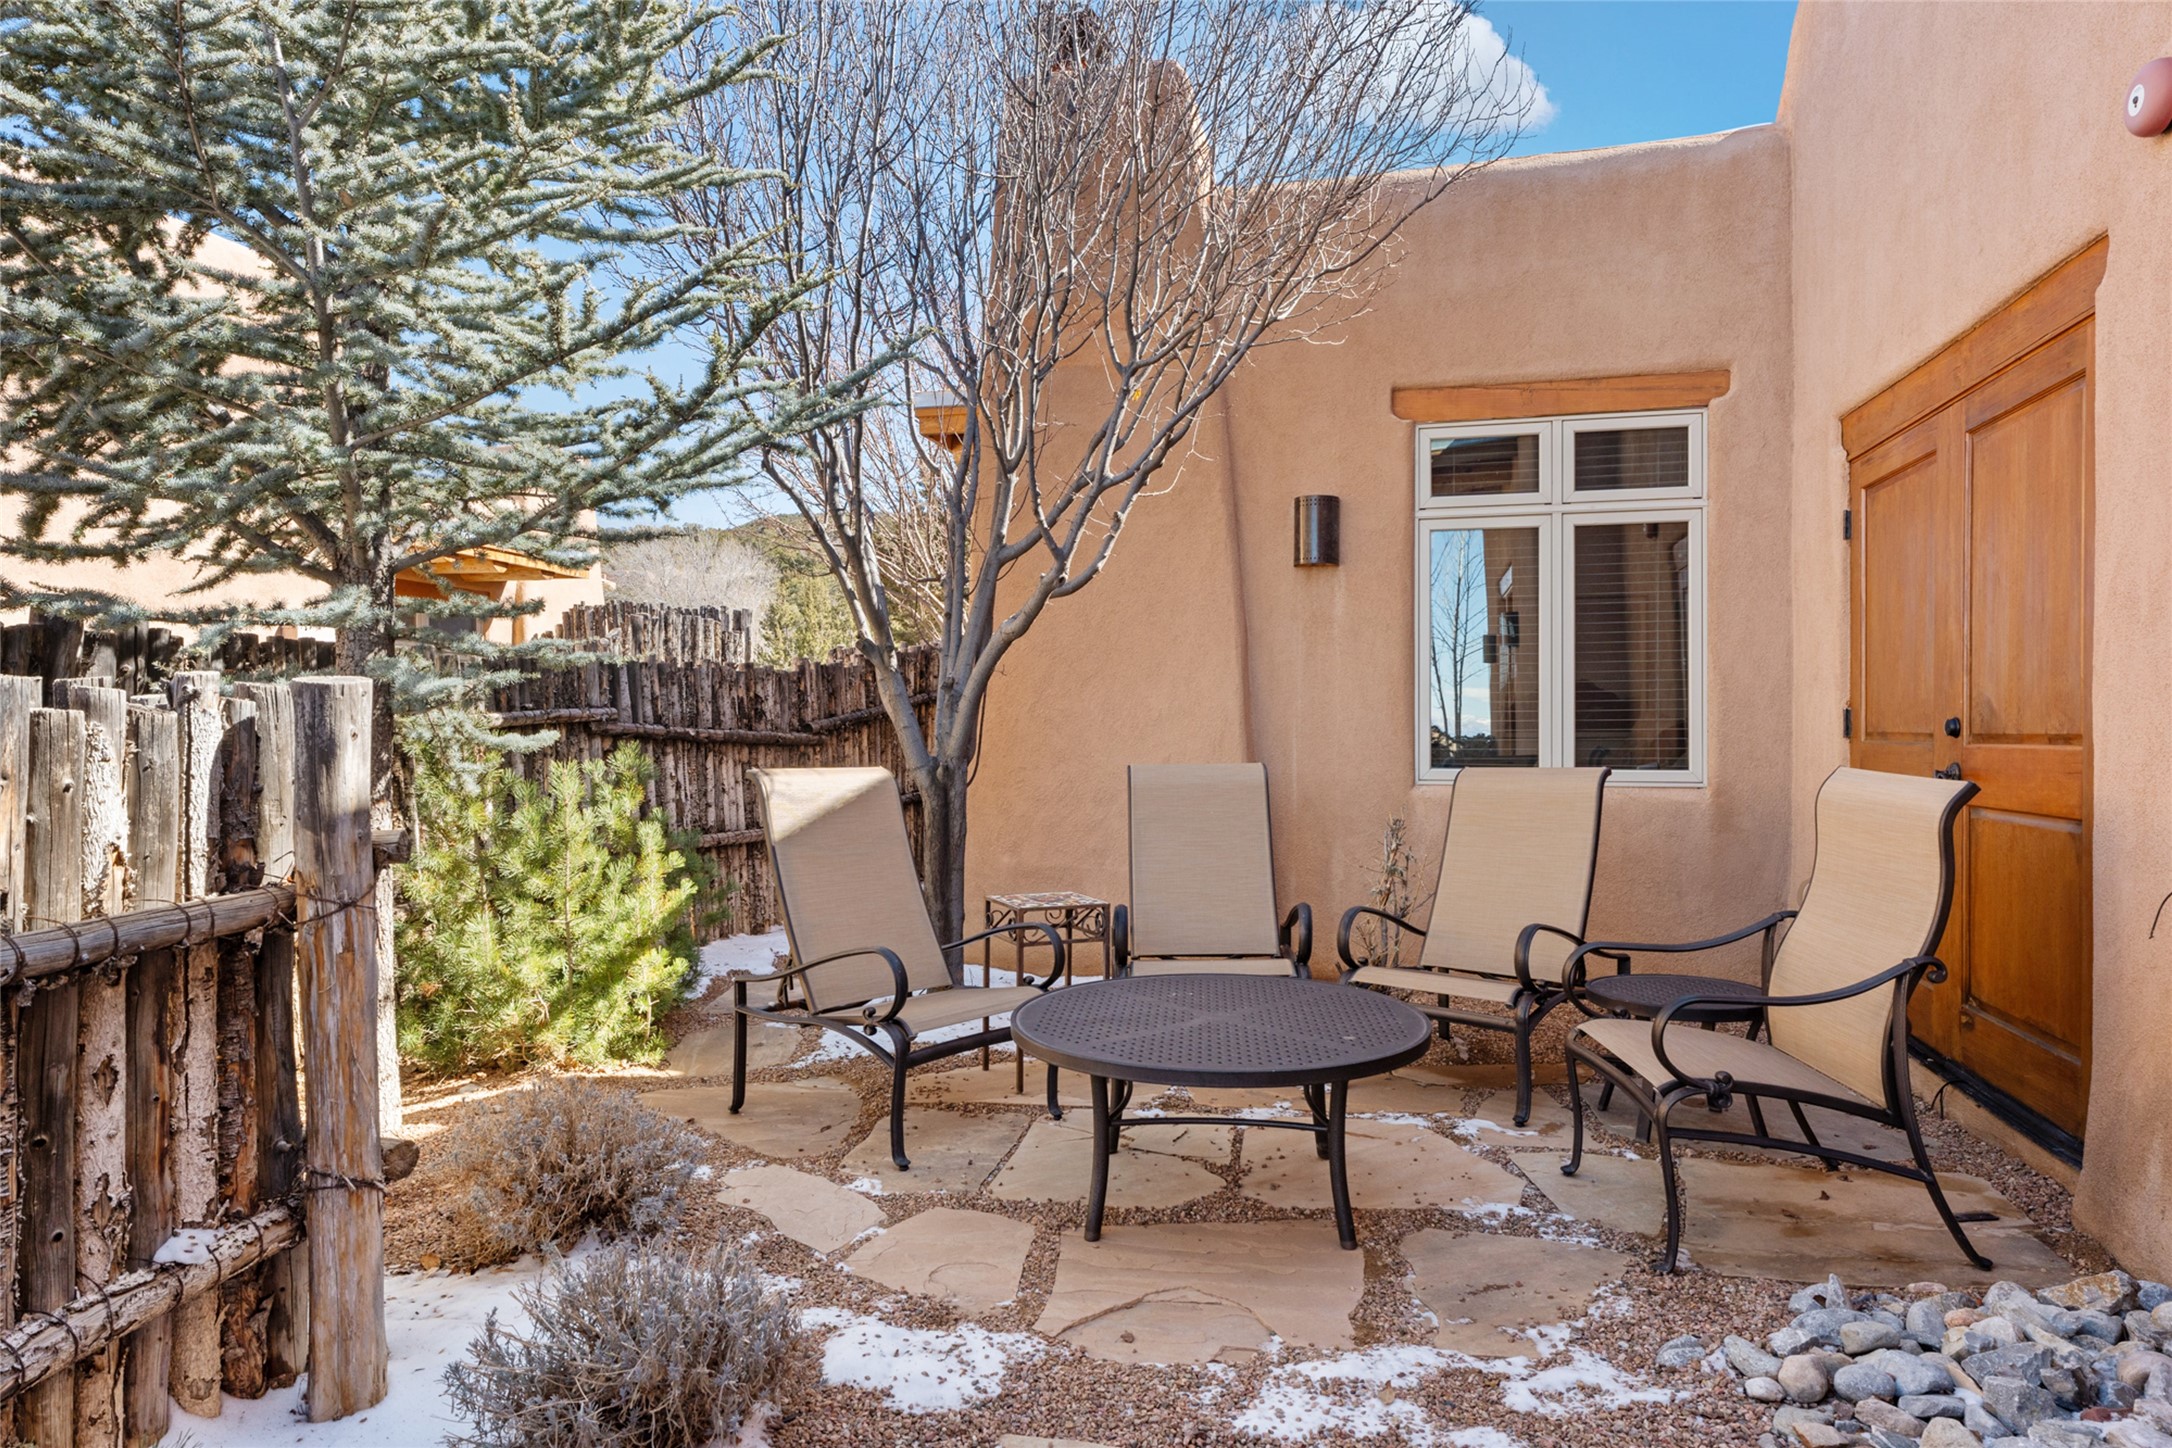 38 Lodge Trail B, Santa Fe, New Mexico 87506, 2 Bedrooms Bedrooms, ,2 BathroomsBathrooms,Residential,For Sale,38 Lodge Trail B,202400333